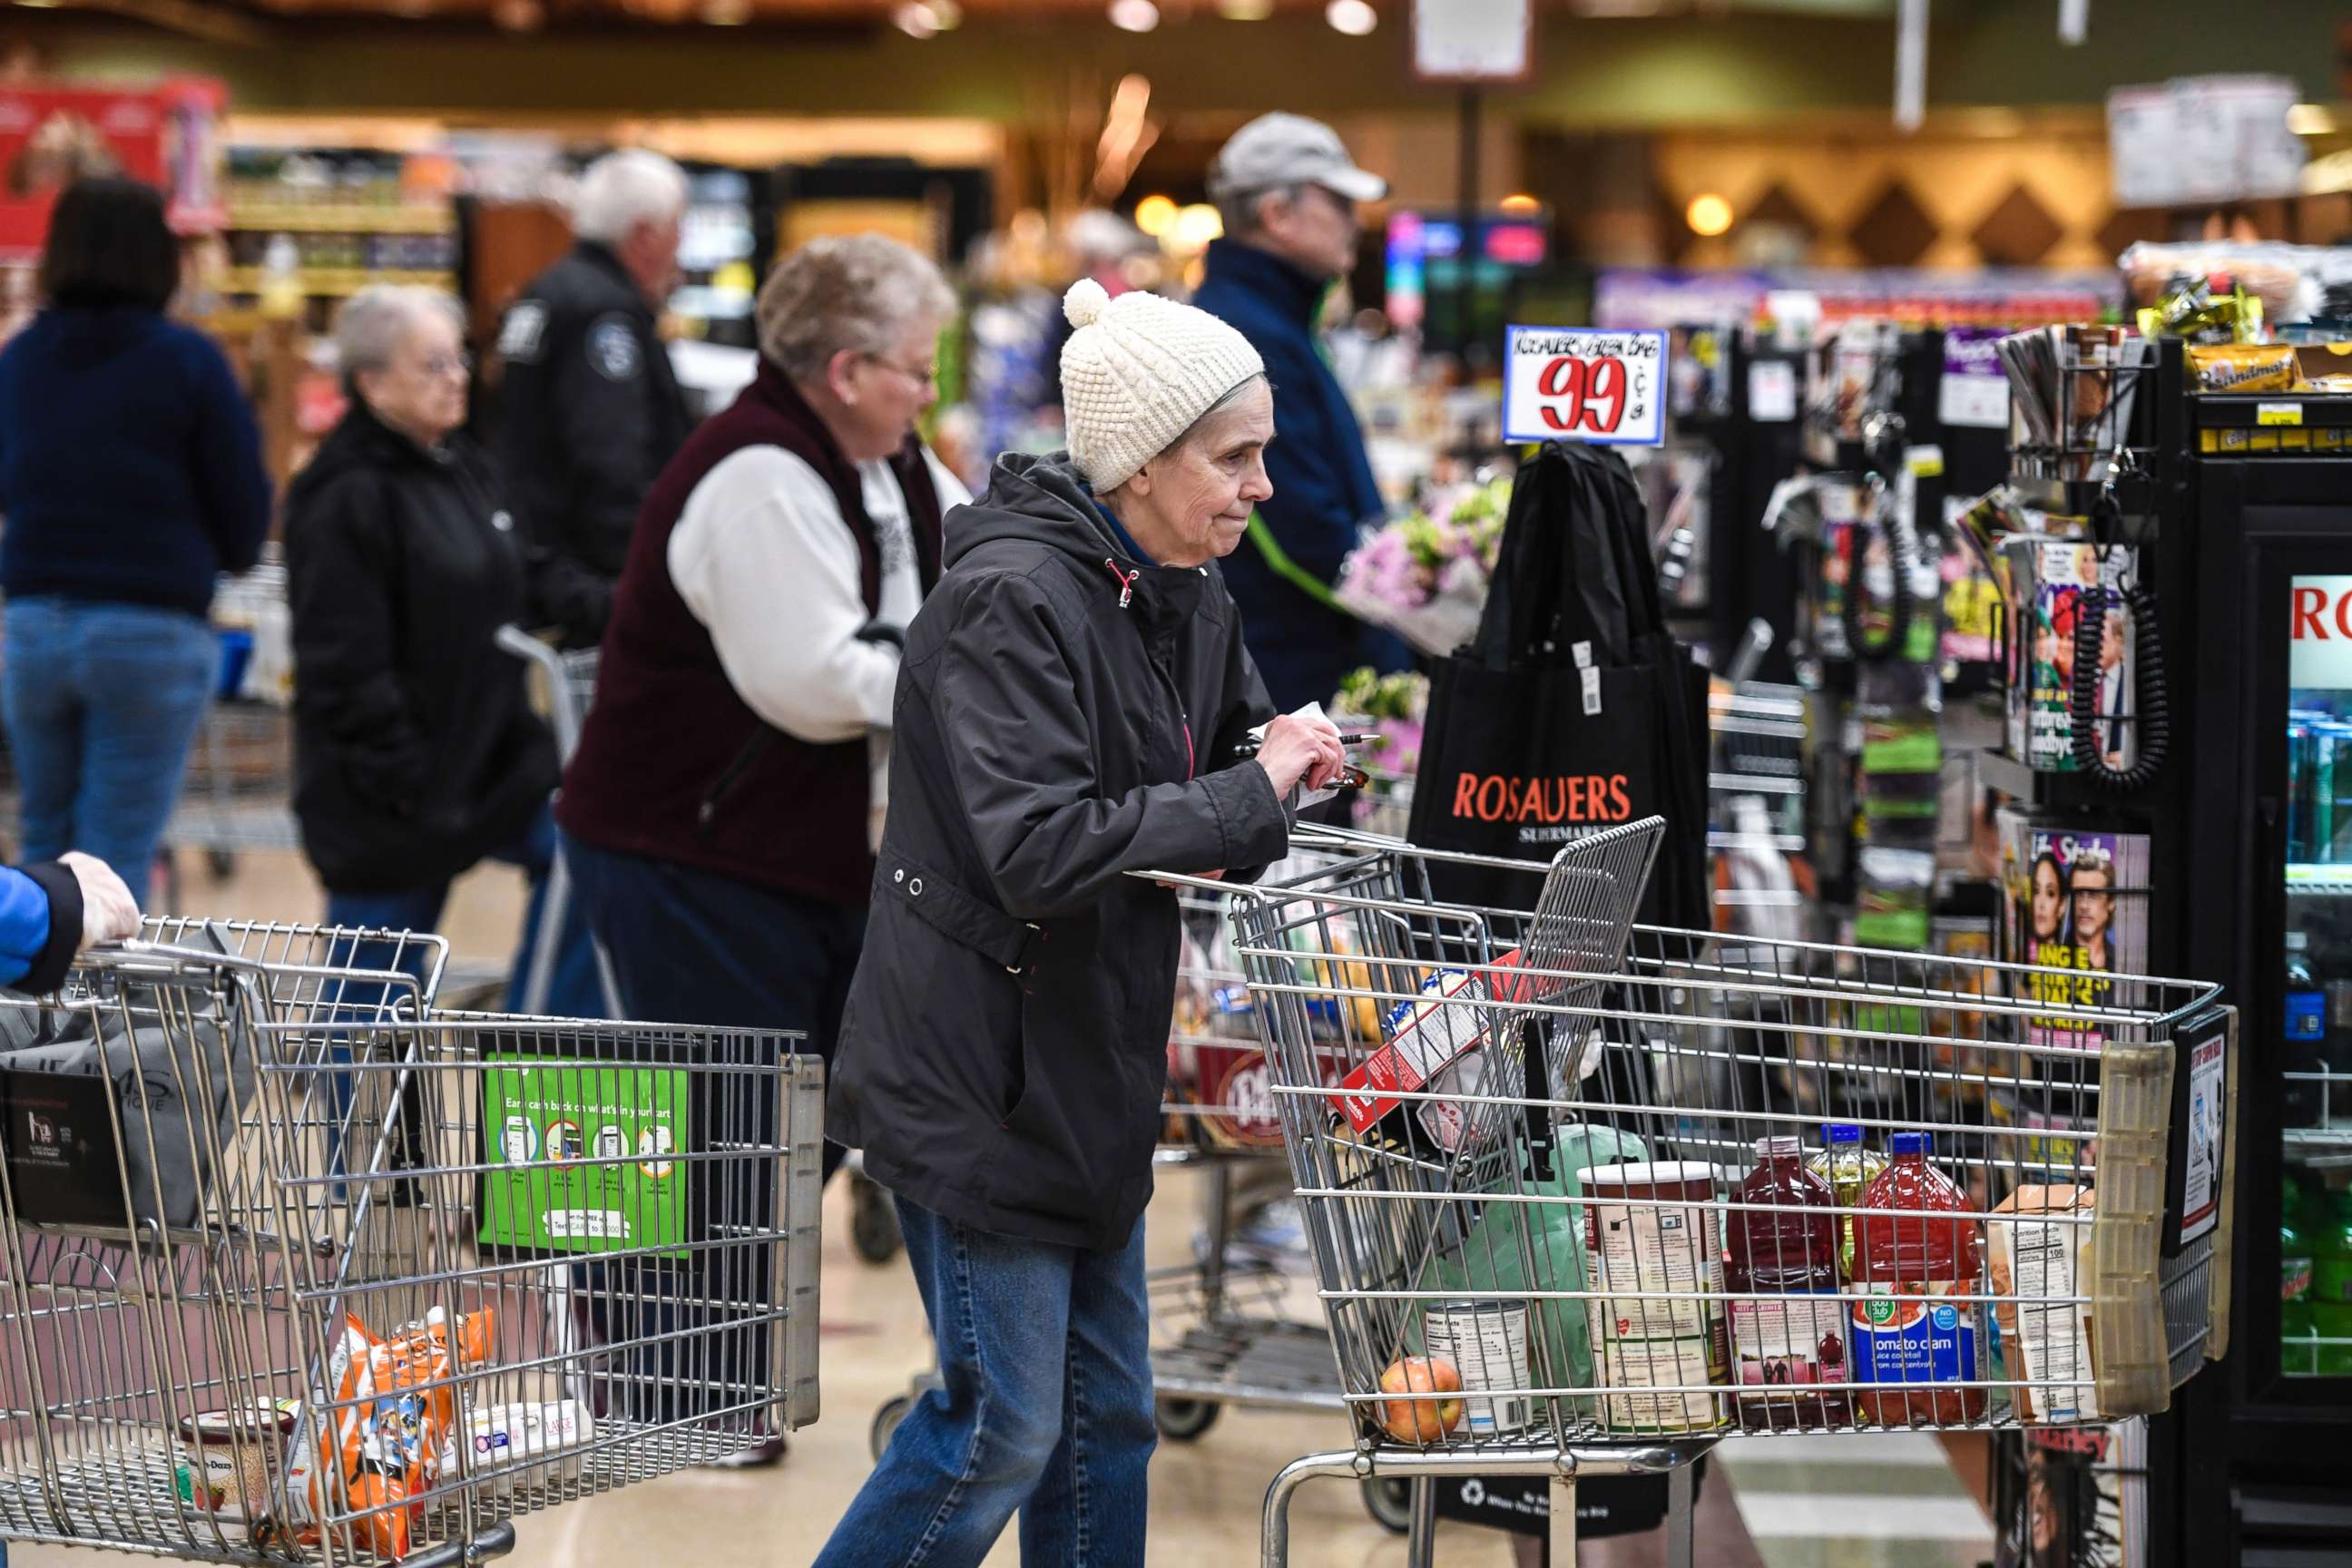 PHOTO: Shopper Patty Rowley waits in the checkout line during senior and at-risk shopping at a grocery store in Spokane, Wash., March 19, 2020.